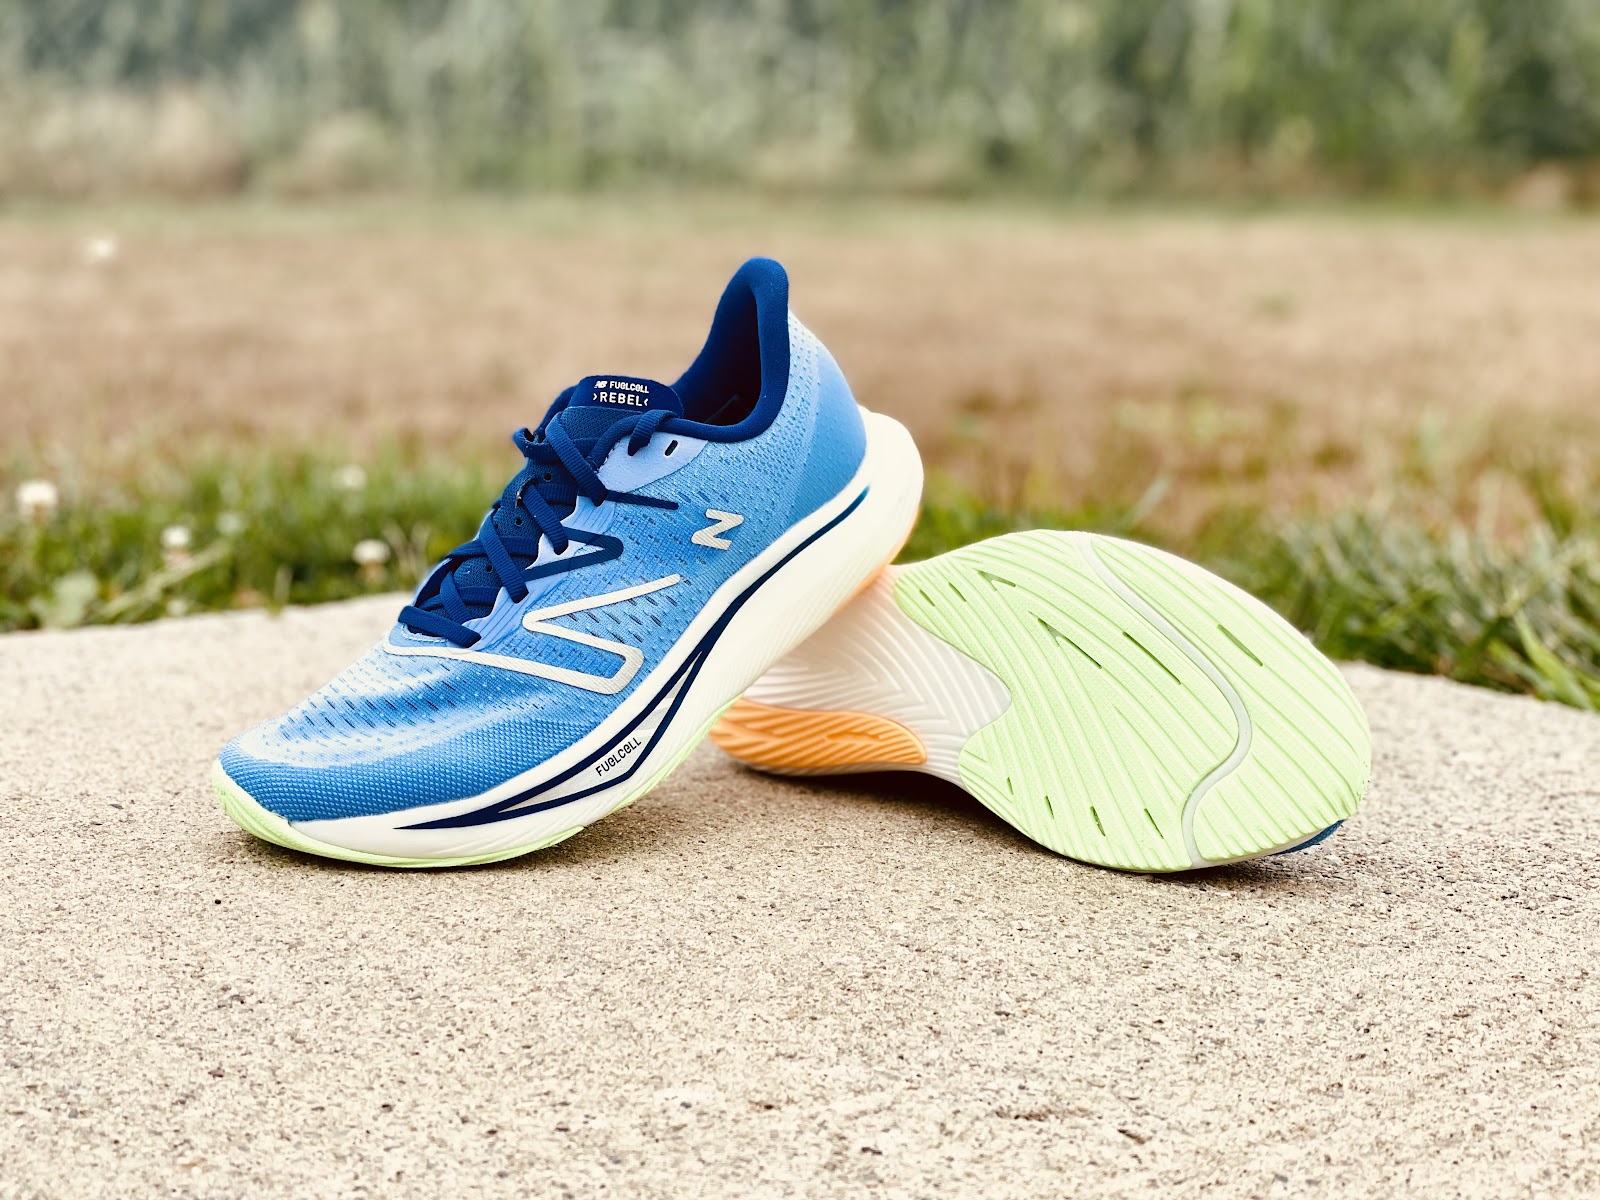 Road Trail Run: New Balance FuelCell Rebel v3 Multi Tester Review